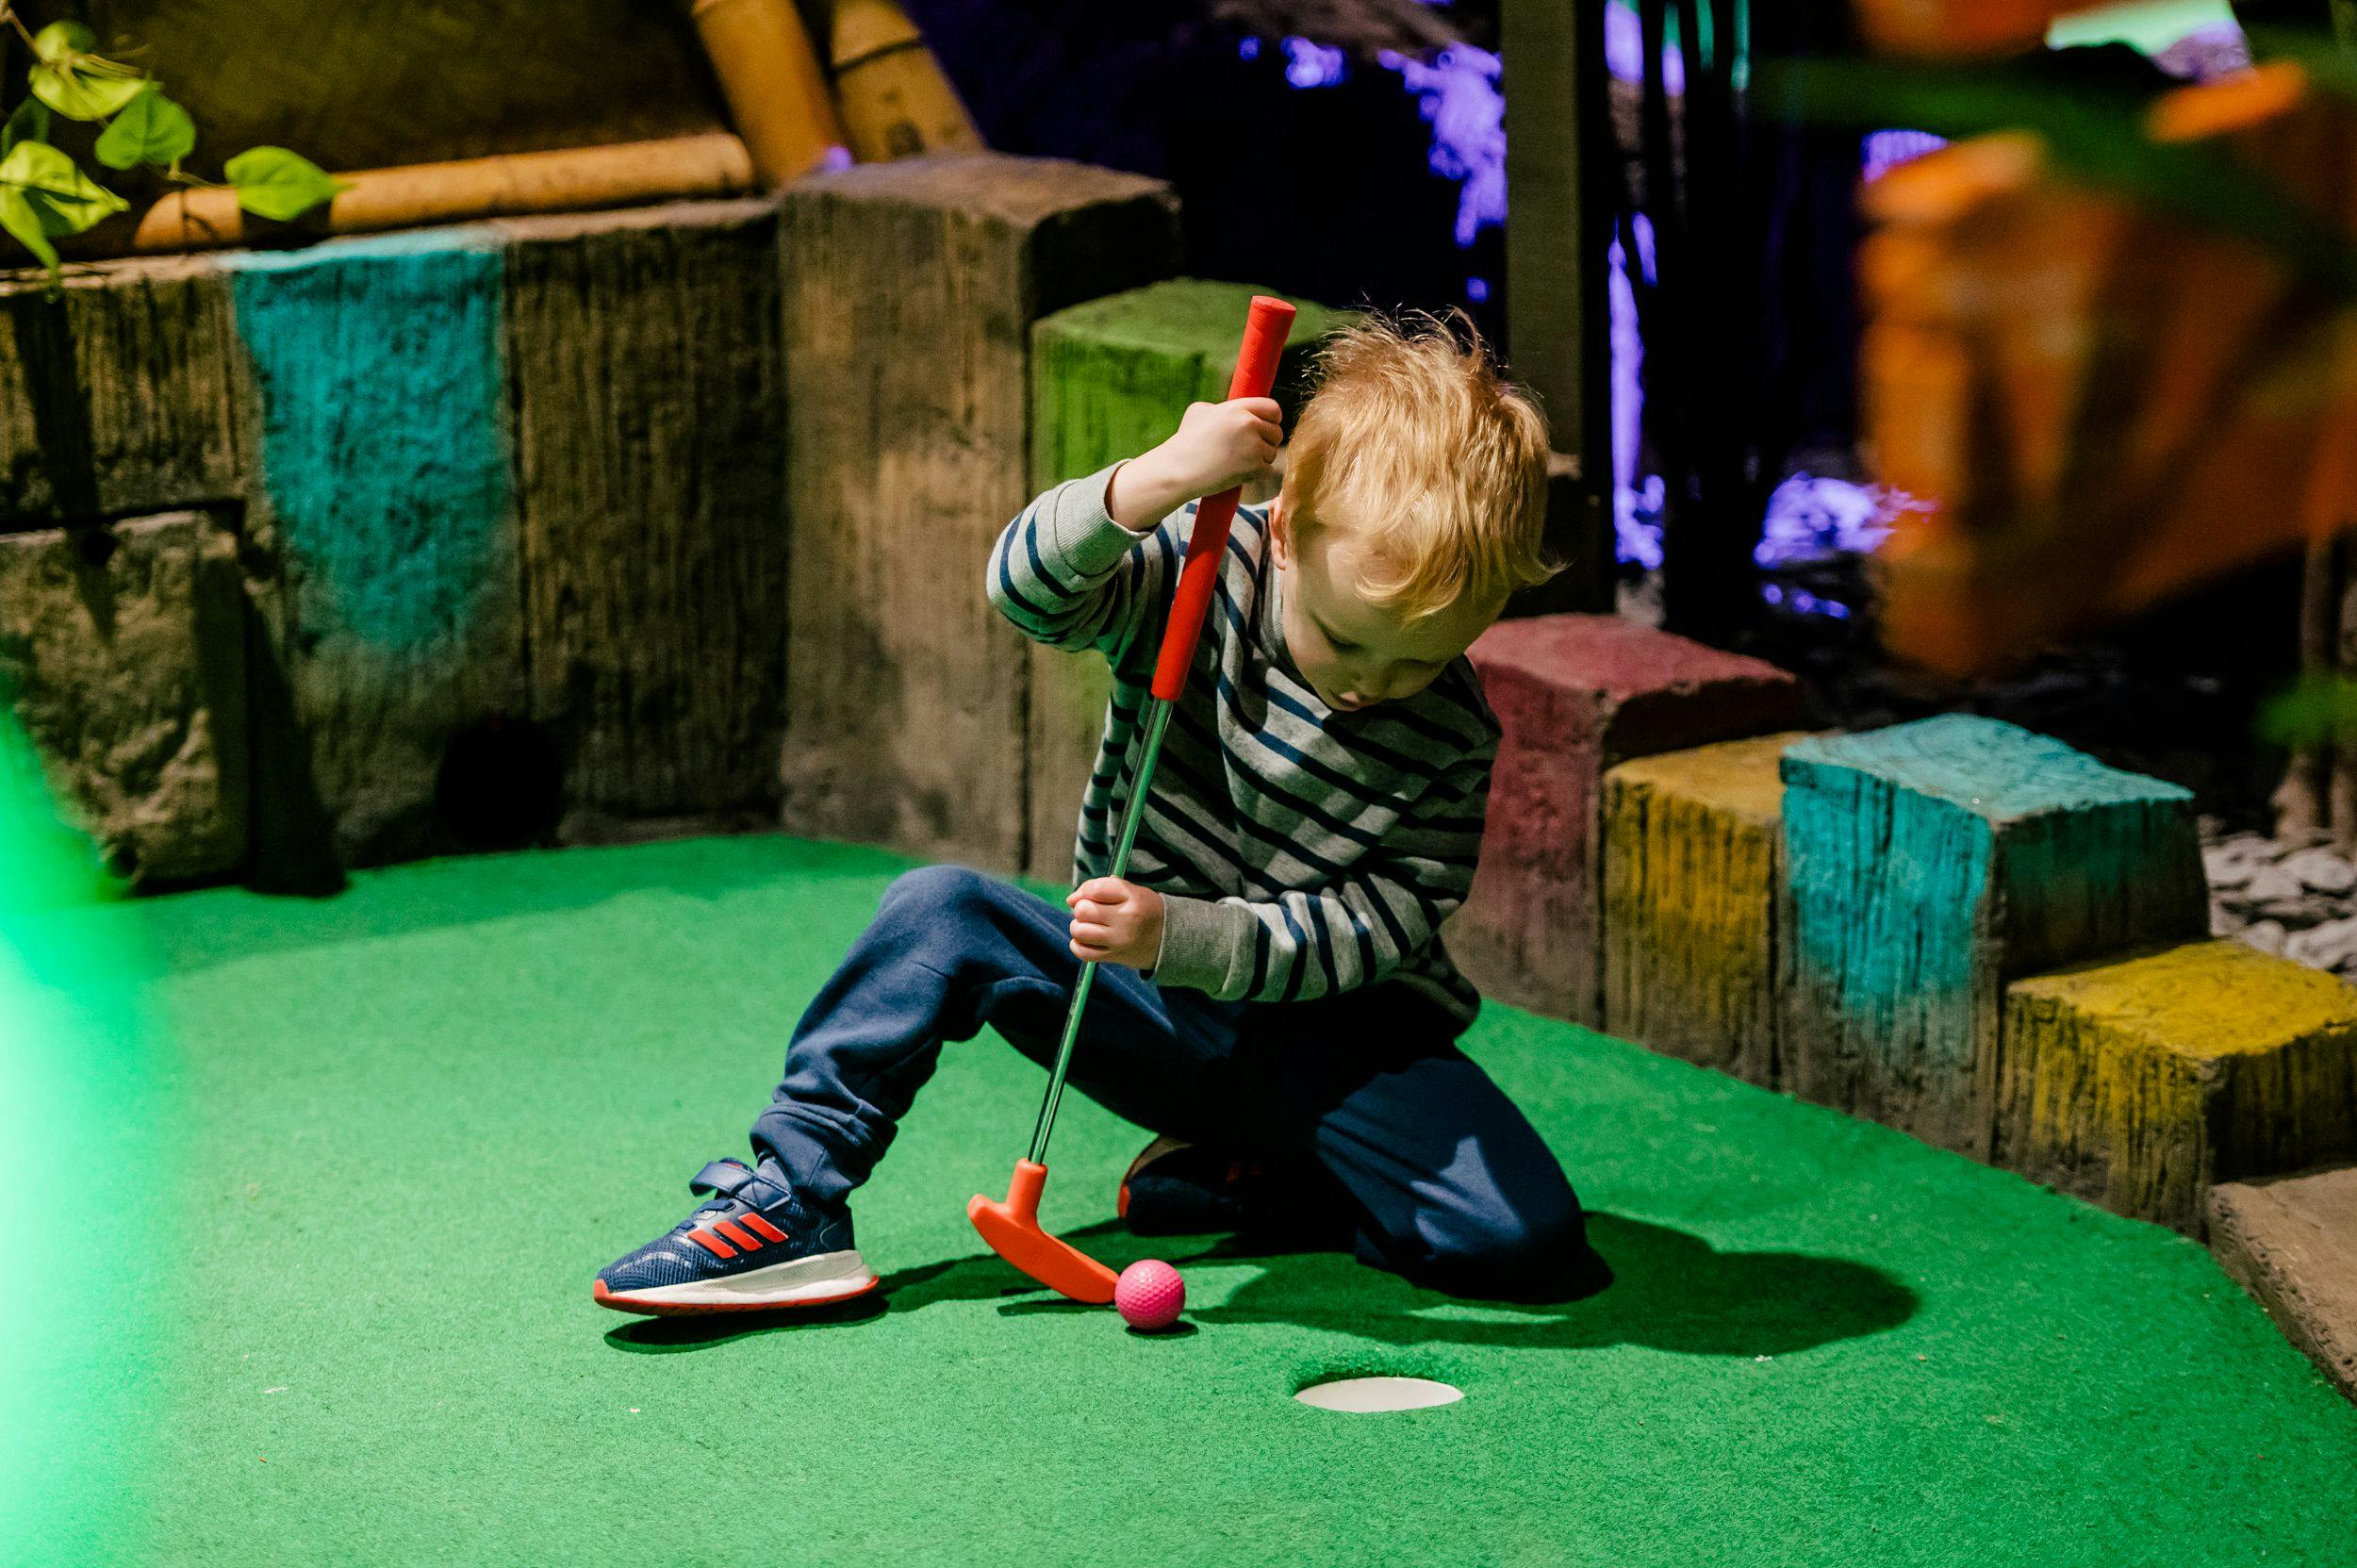 A small toddler kneeling down to hit the golf ball.